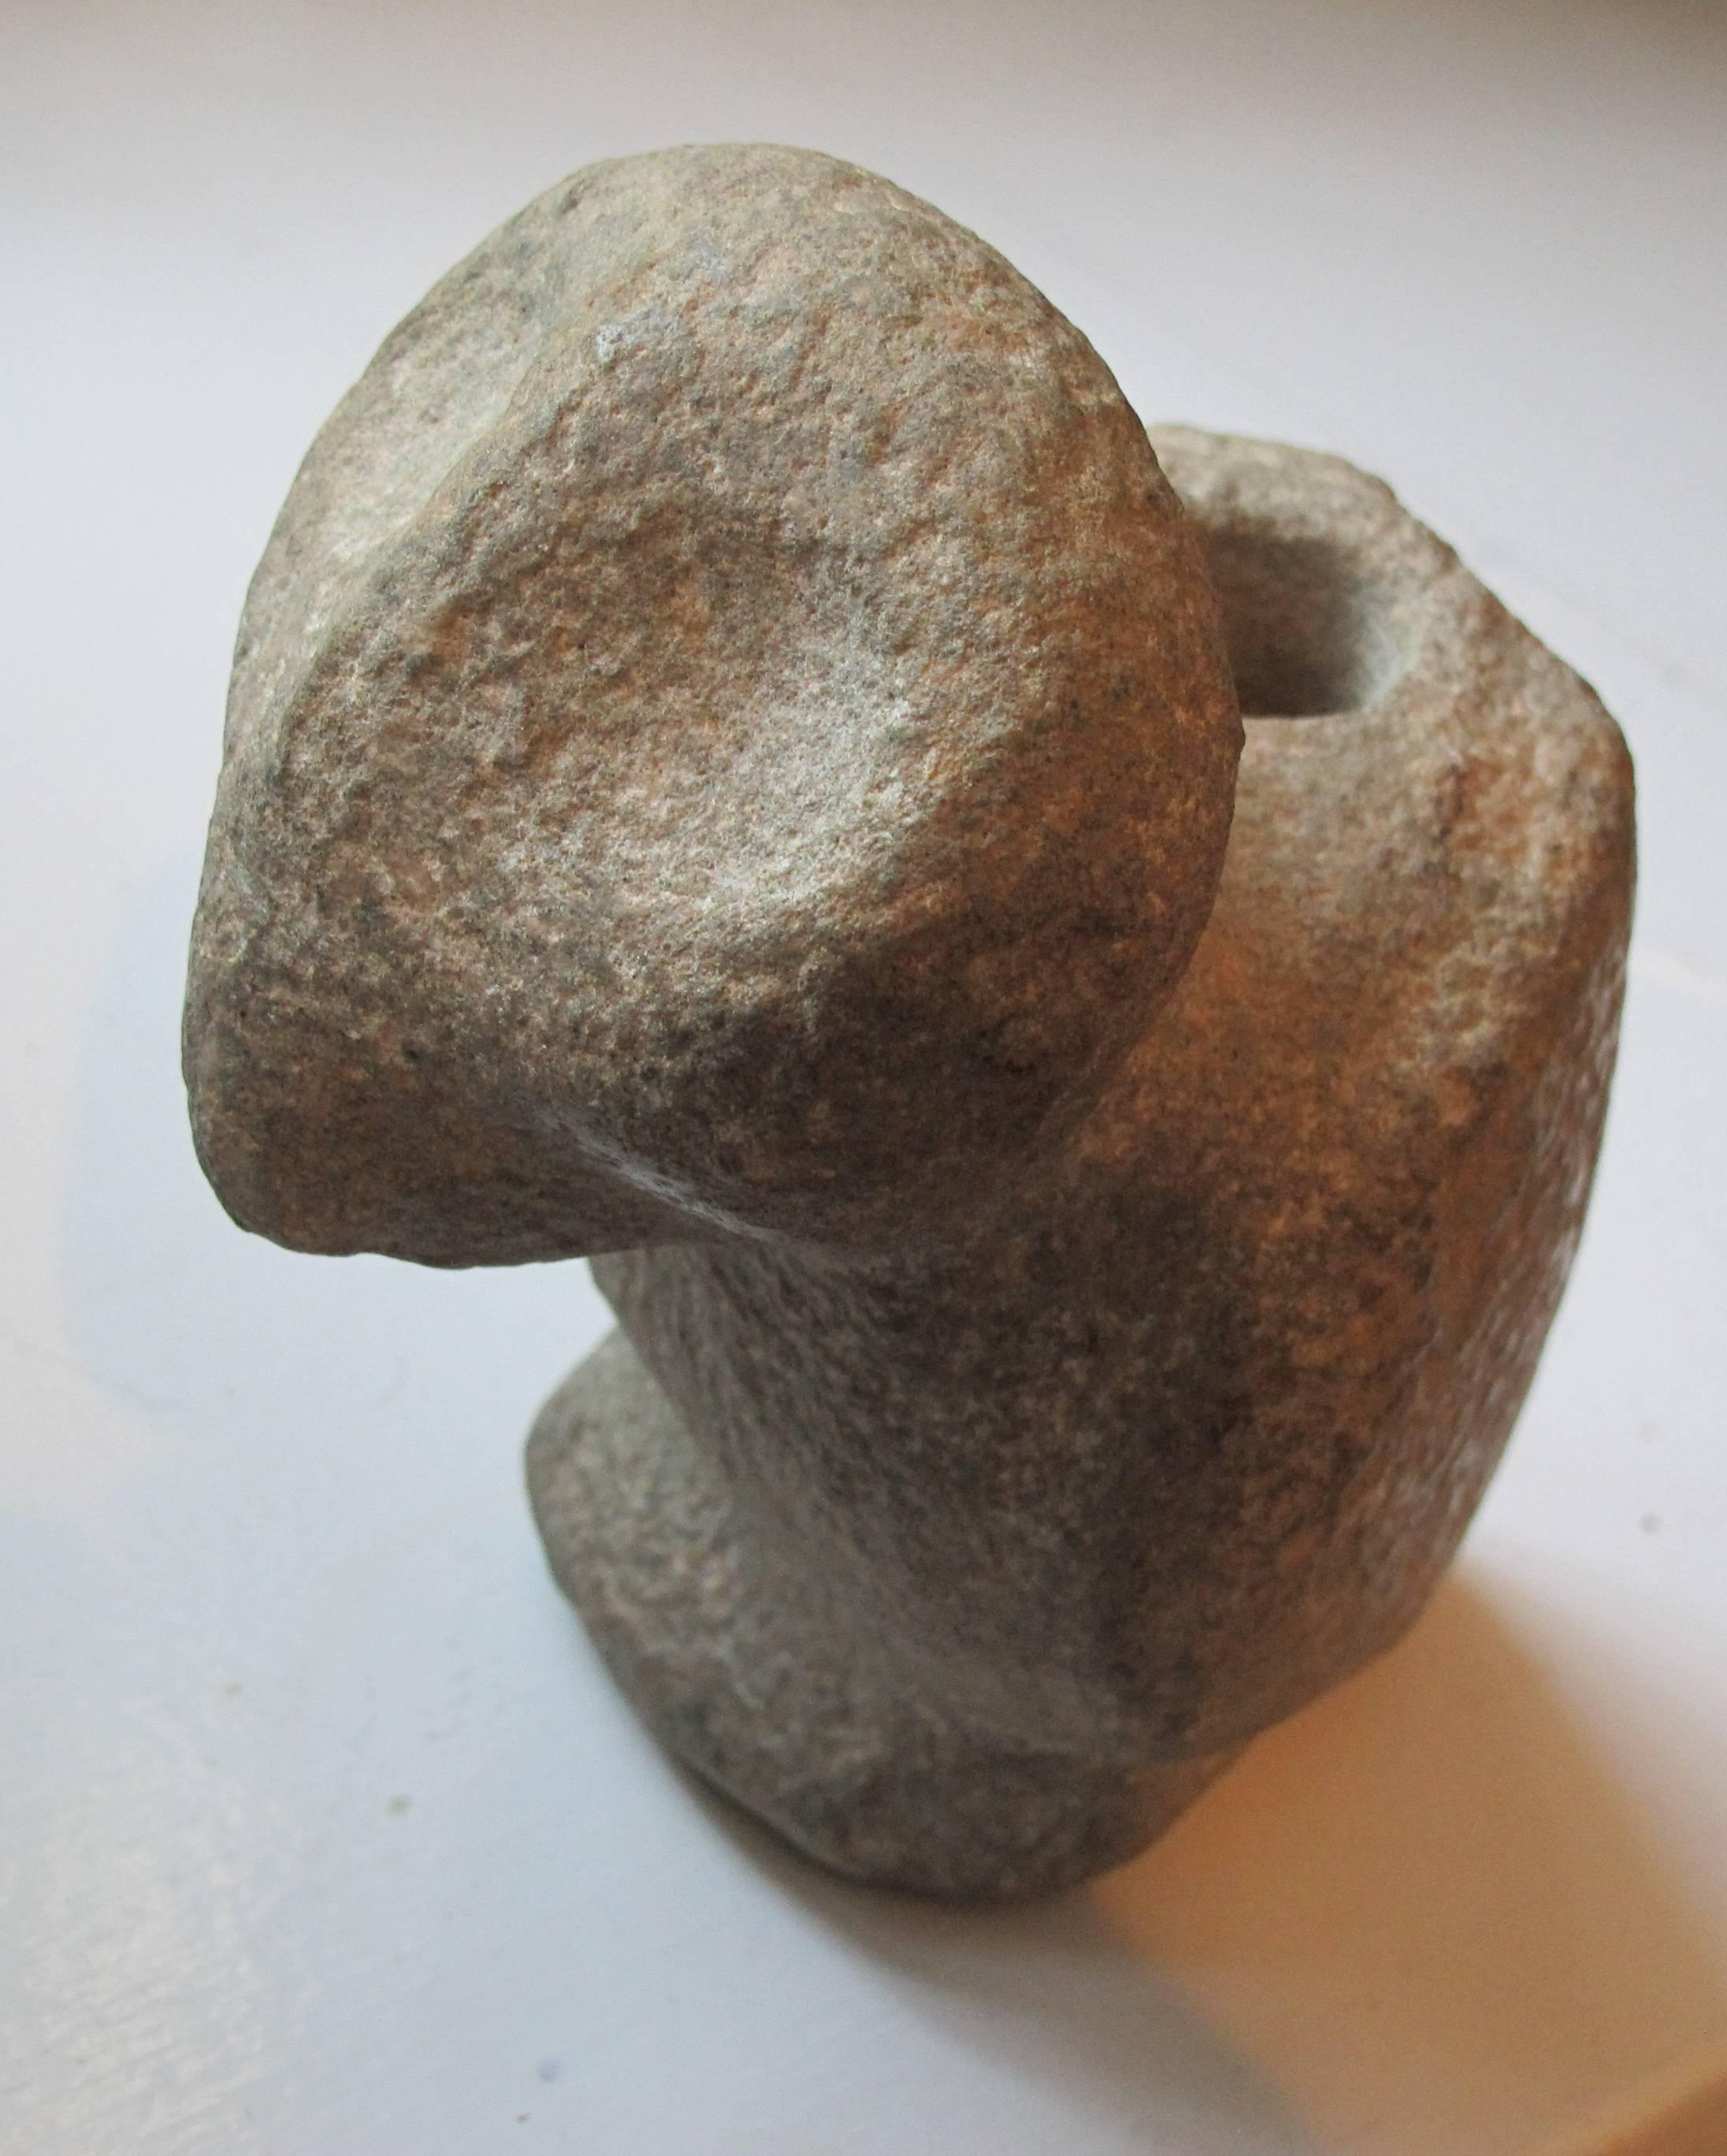 Chip carved sandstone bird effigy with forward thrust head with large socket eyes. There is a conical hole behind the head that connects to a second conical hole in the back between the wings. The prior owner had believed it to be a pipe as stone